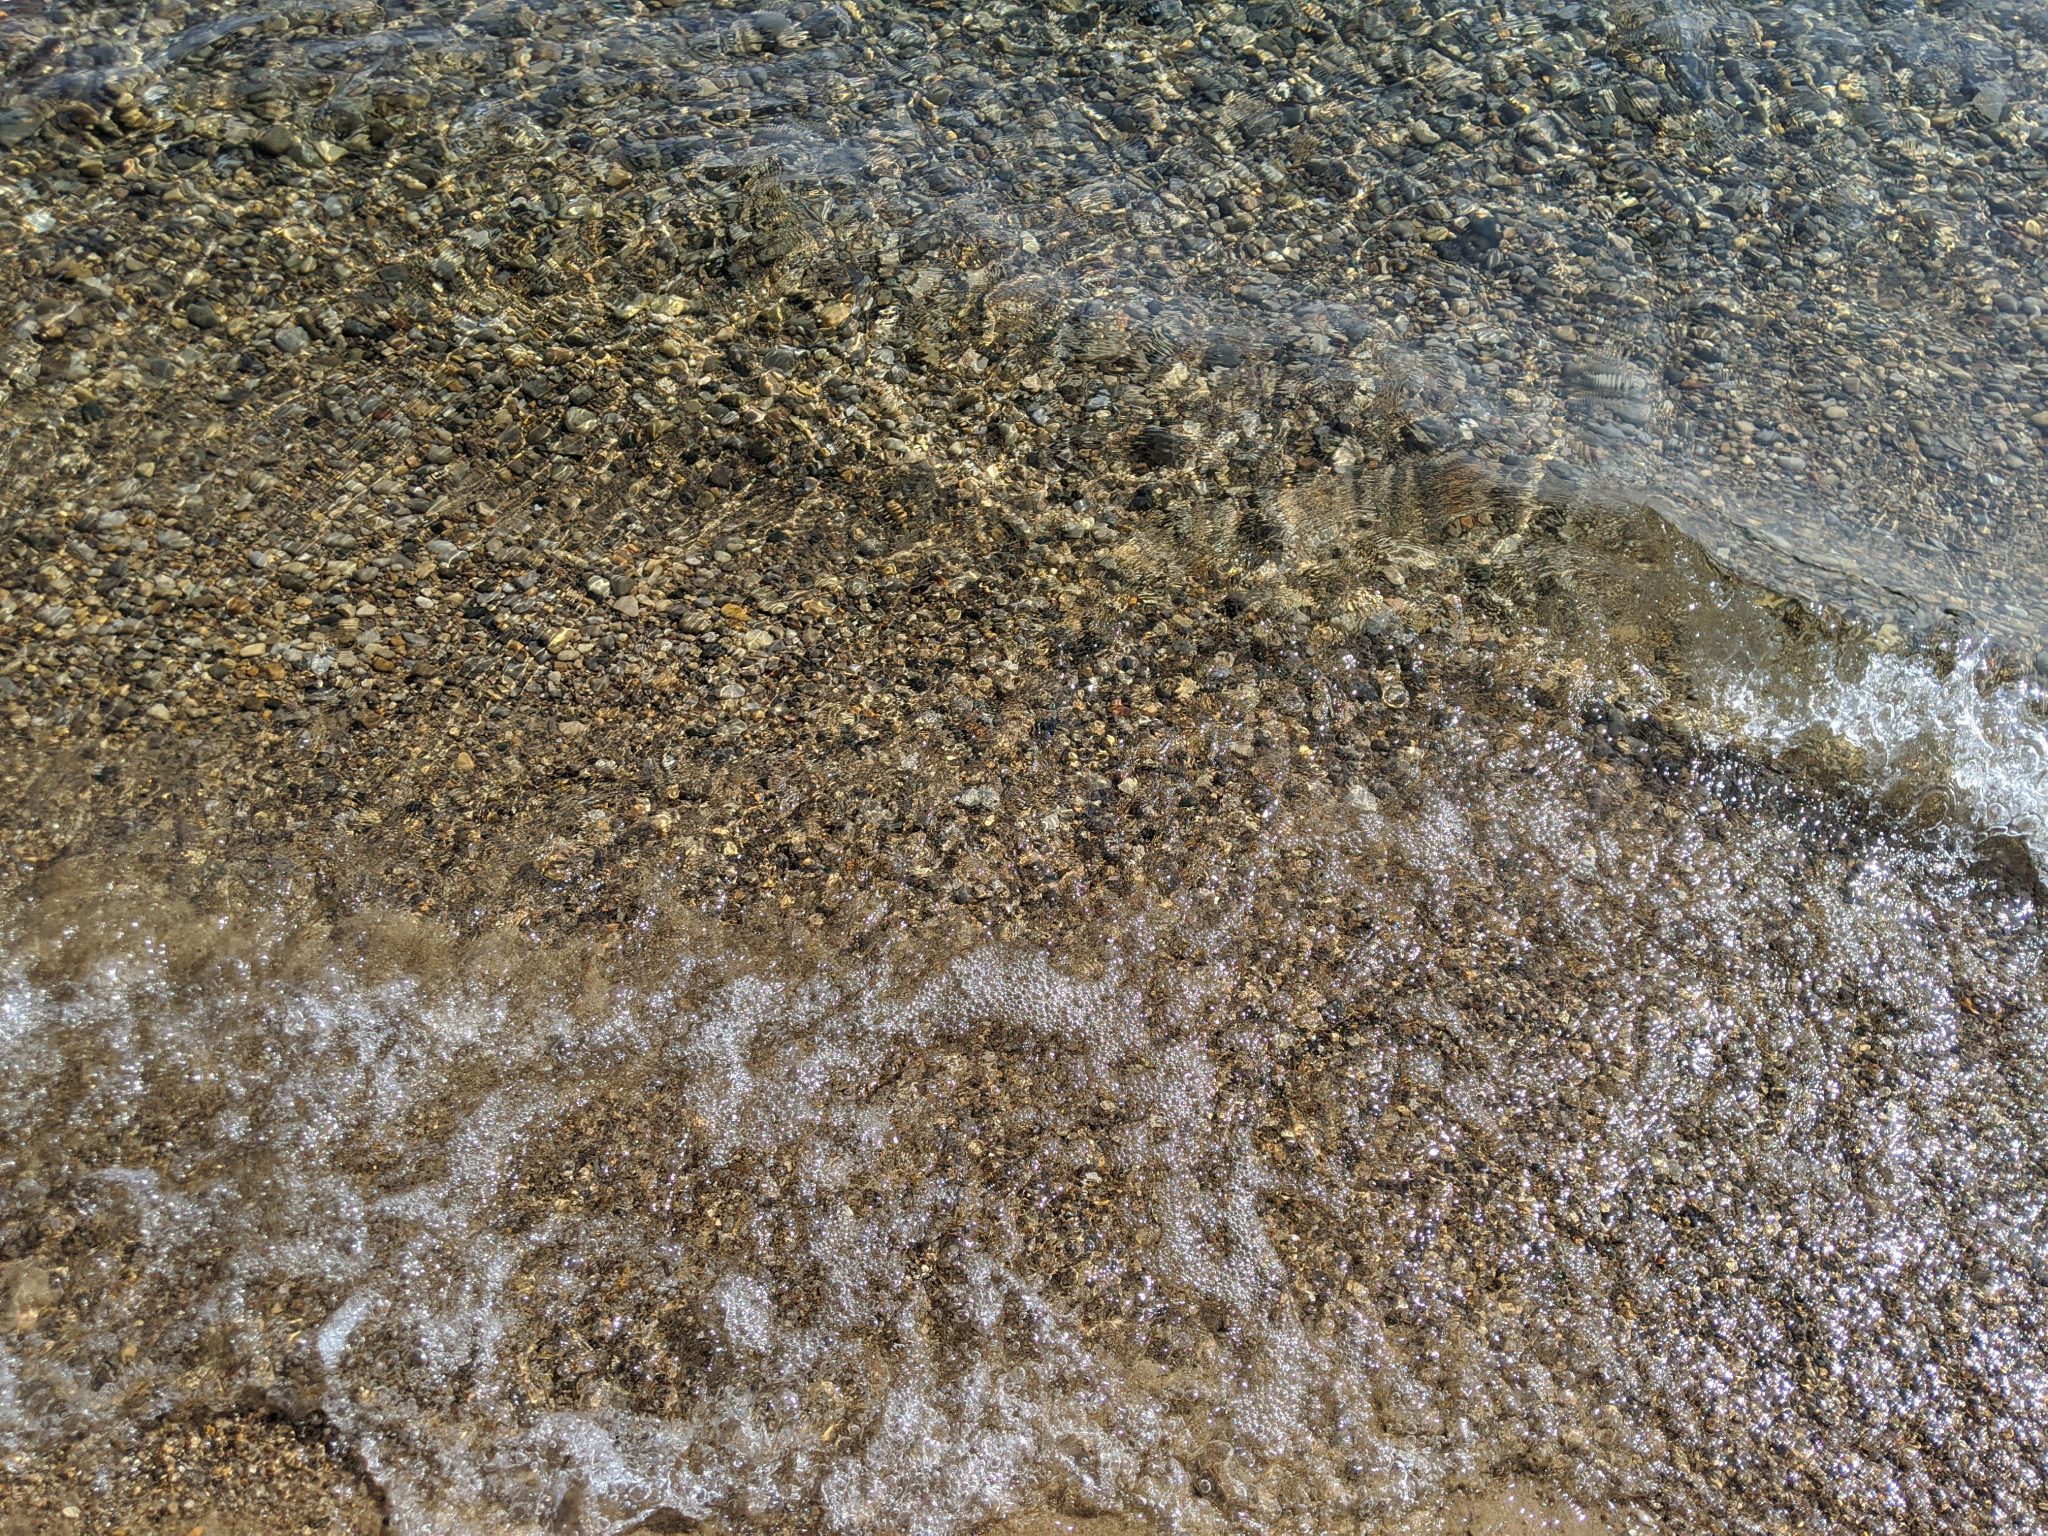 Rocks under waves on the shore of Lake Michigan